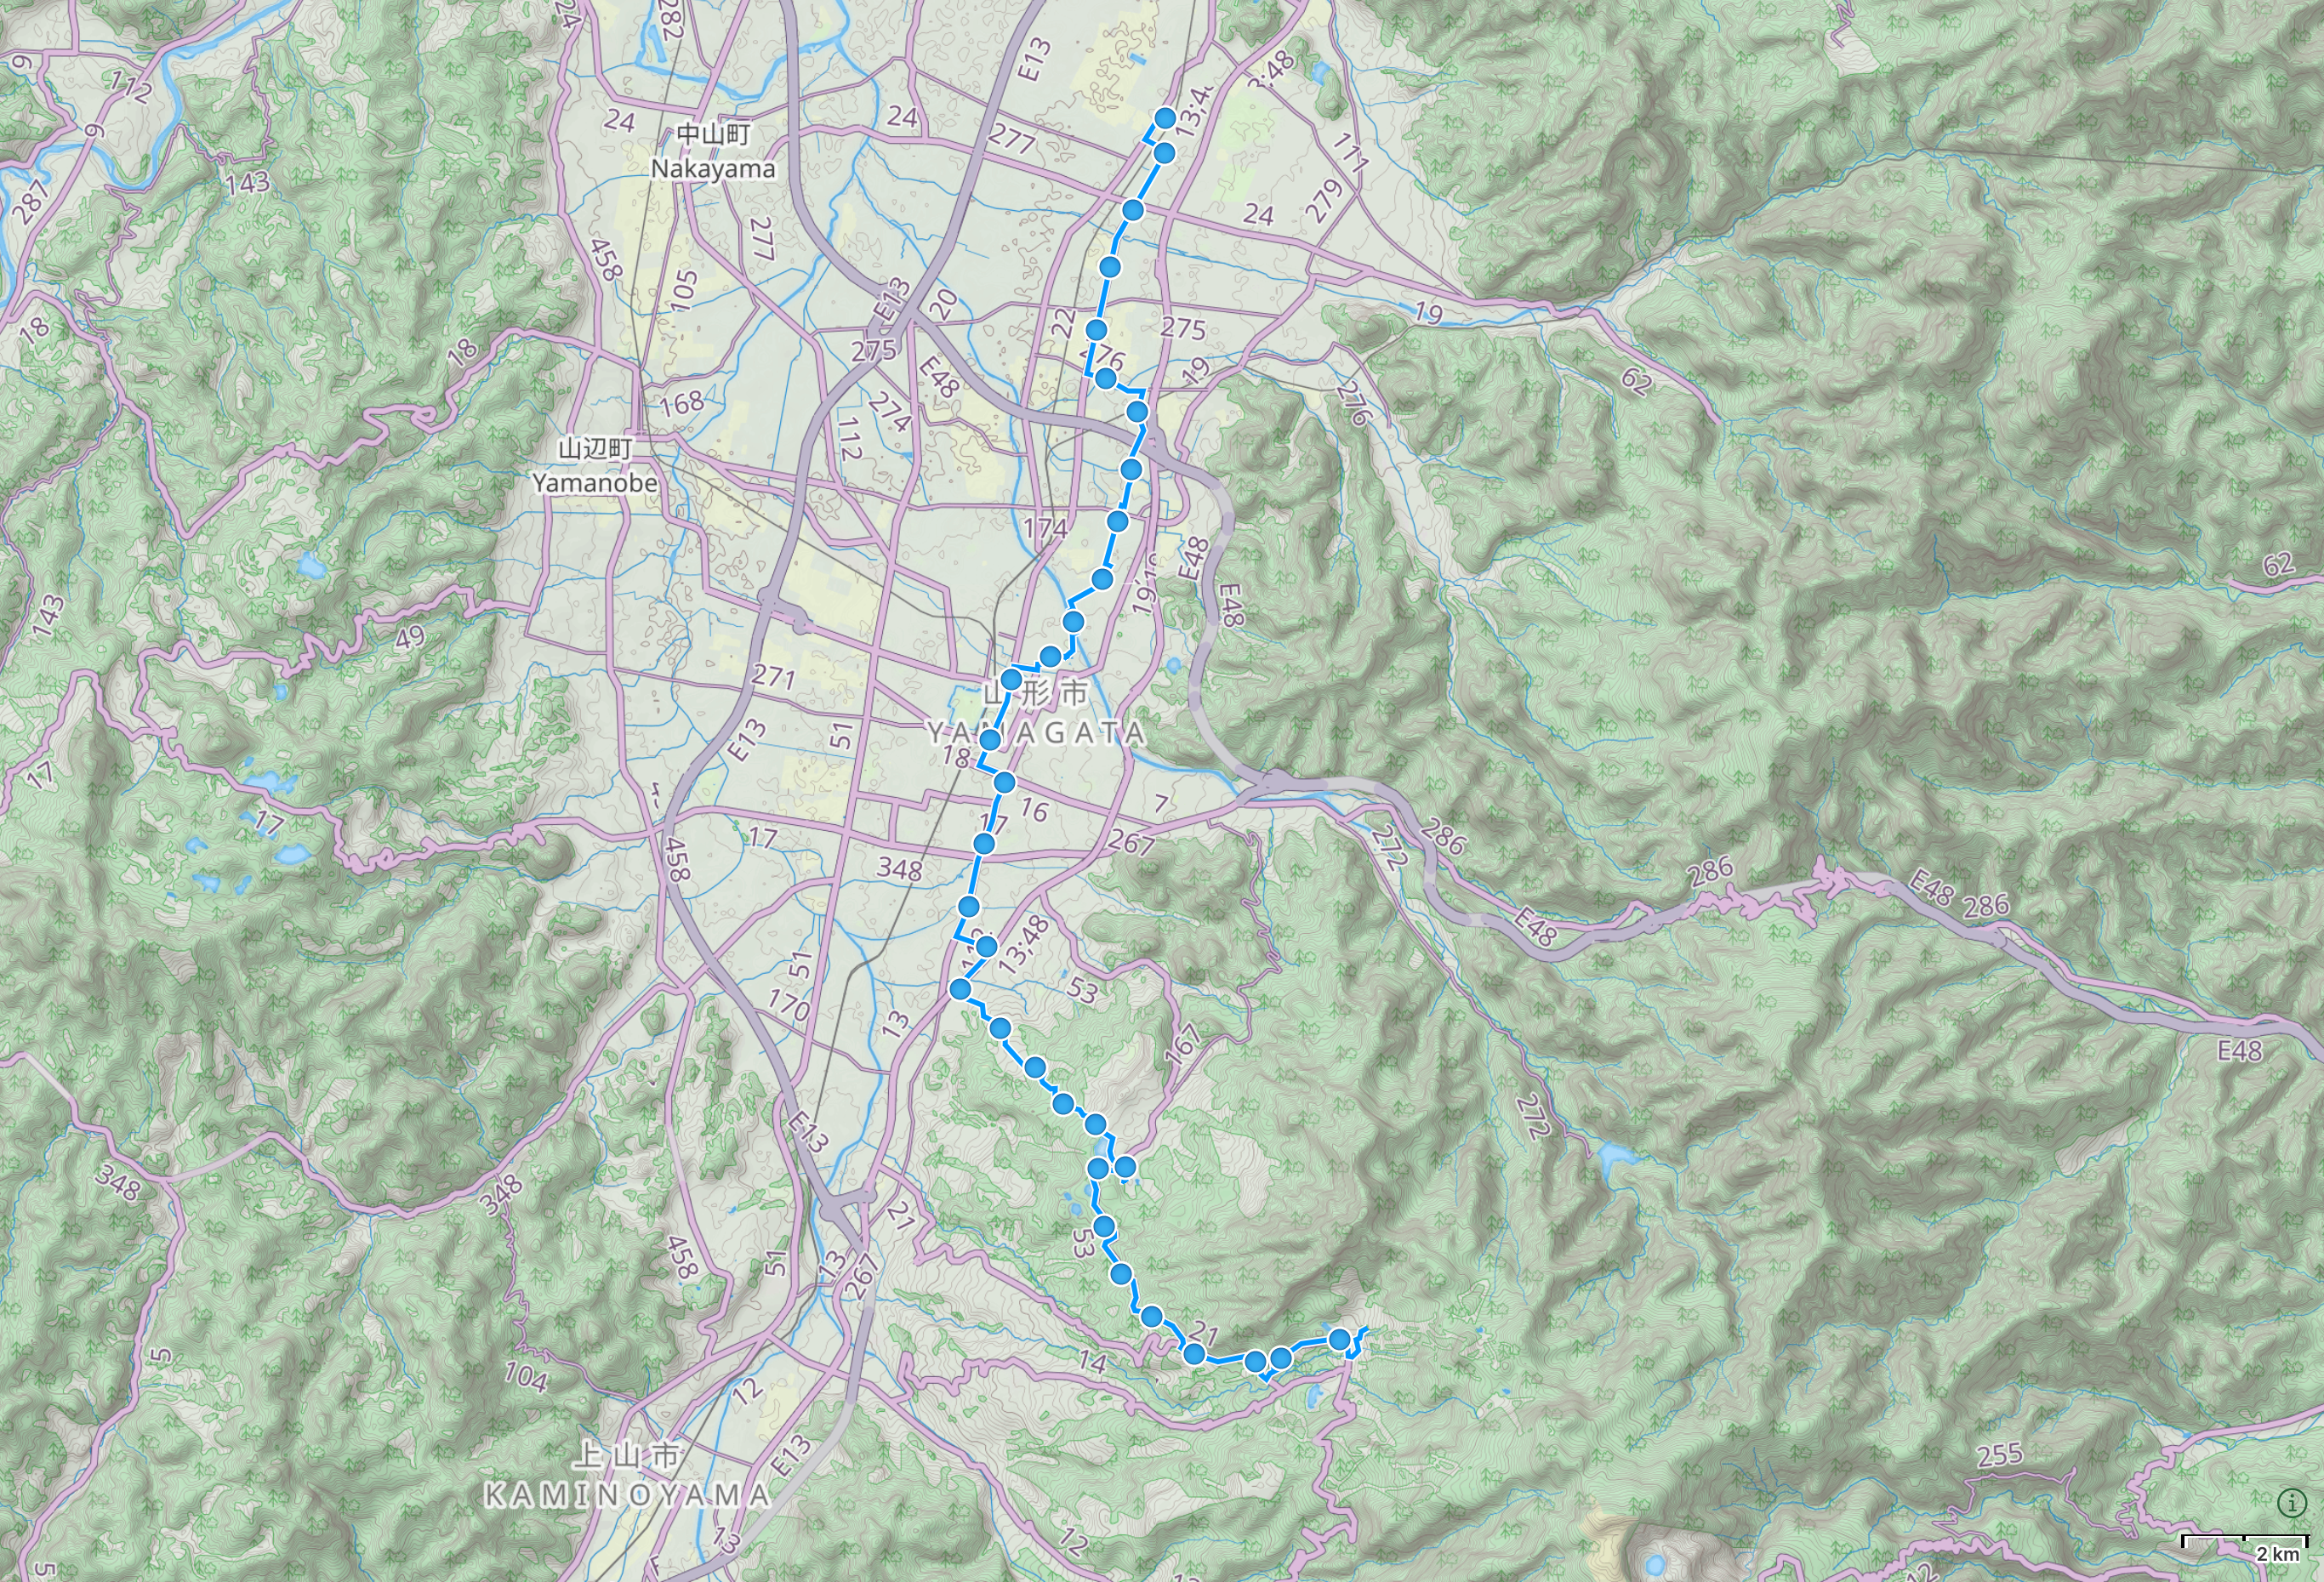 Map of Yamagata prefecture with author’s route from Zaō Hot Spring to Tendō highlighted.